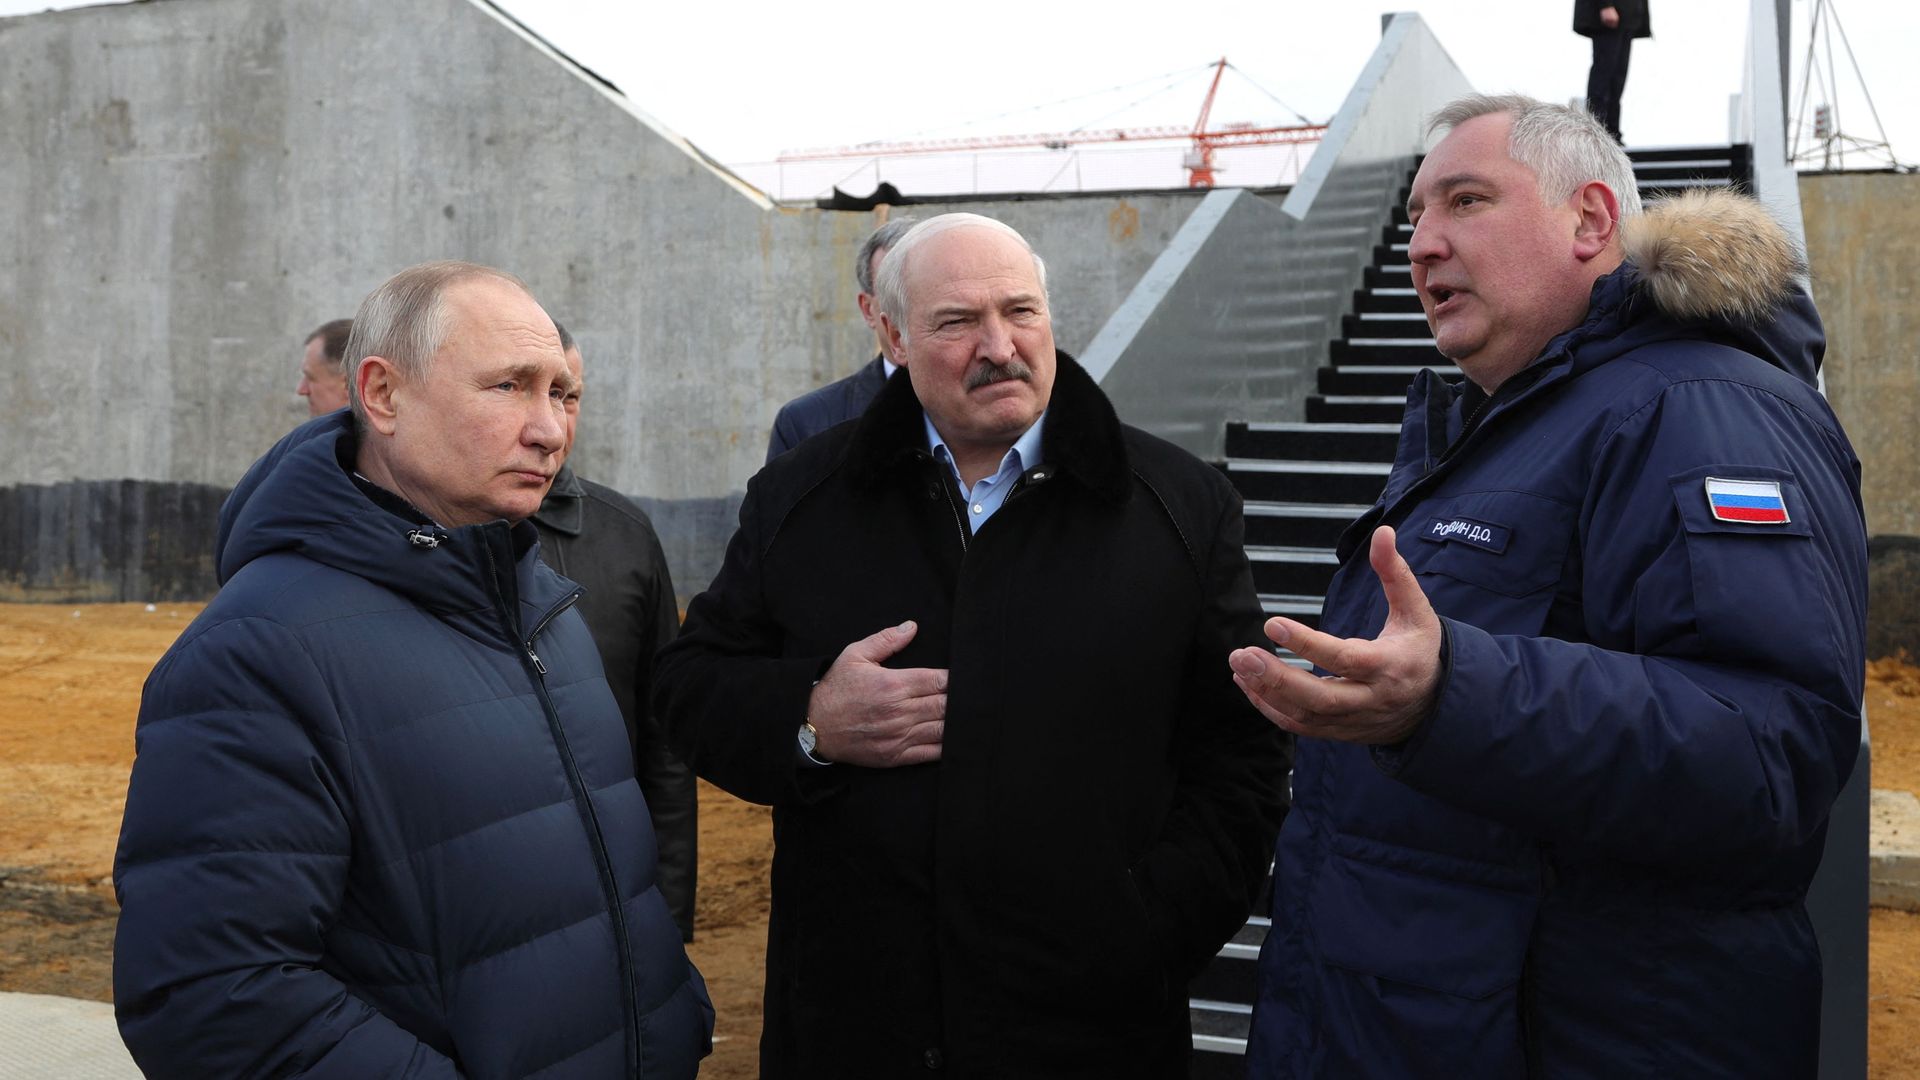 Roscosmos chief Dmitry Rogozin (R) gives explanations to Russia's President Vladimir Putin (L) and Belarus President Alexander Lukashenko (C) during their visit at the Vostochny cosmodrome.